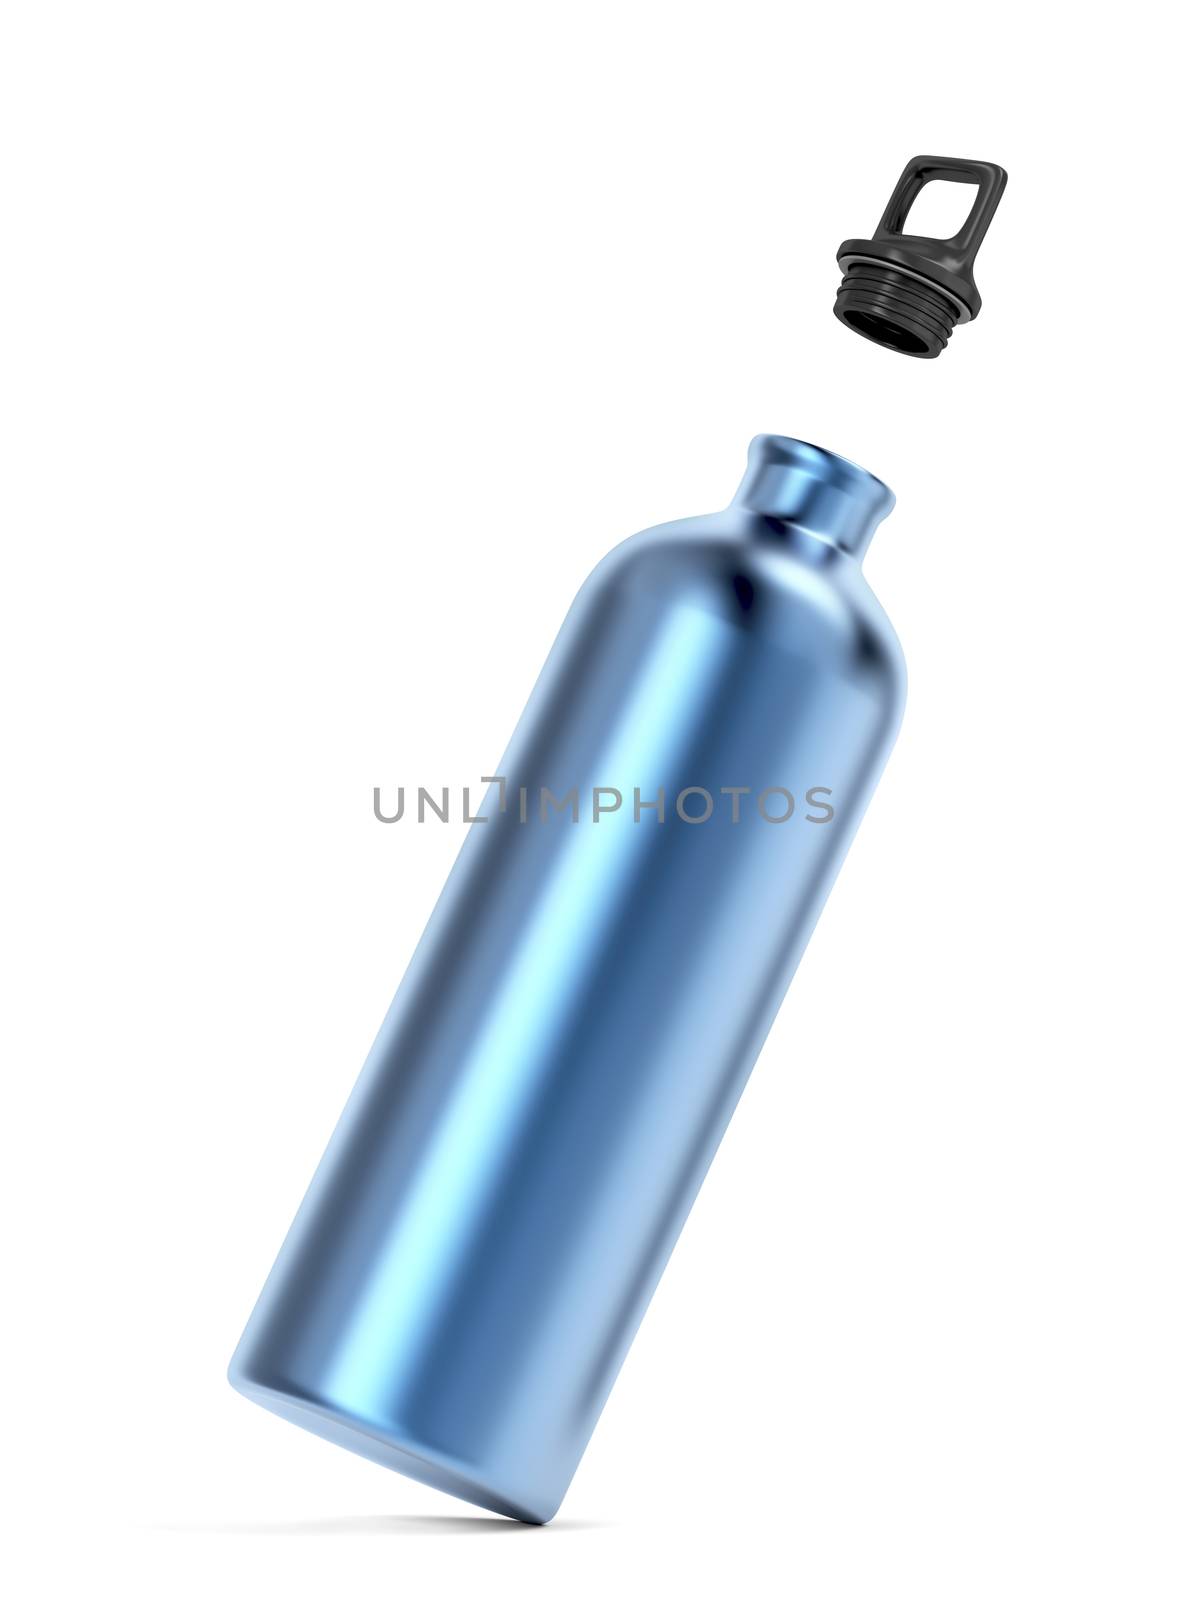 Aluminum water bottle by magraphics